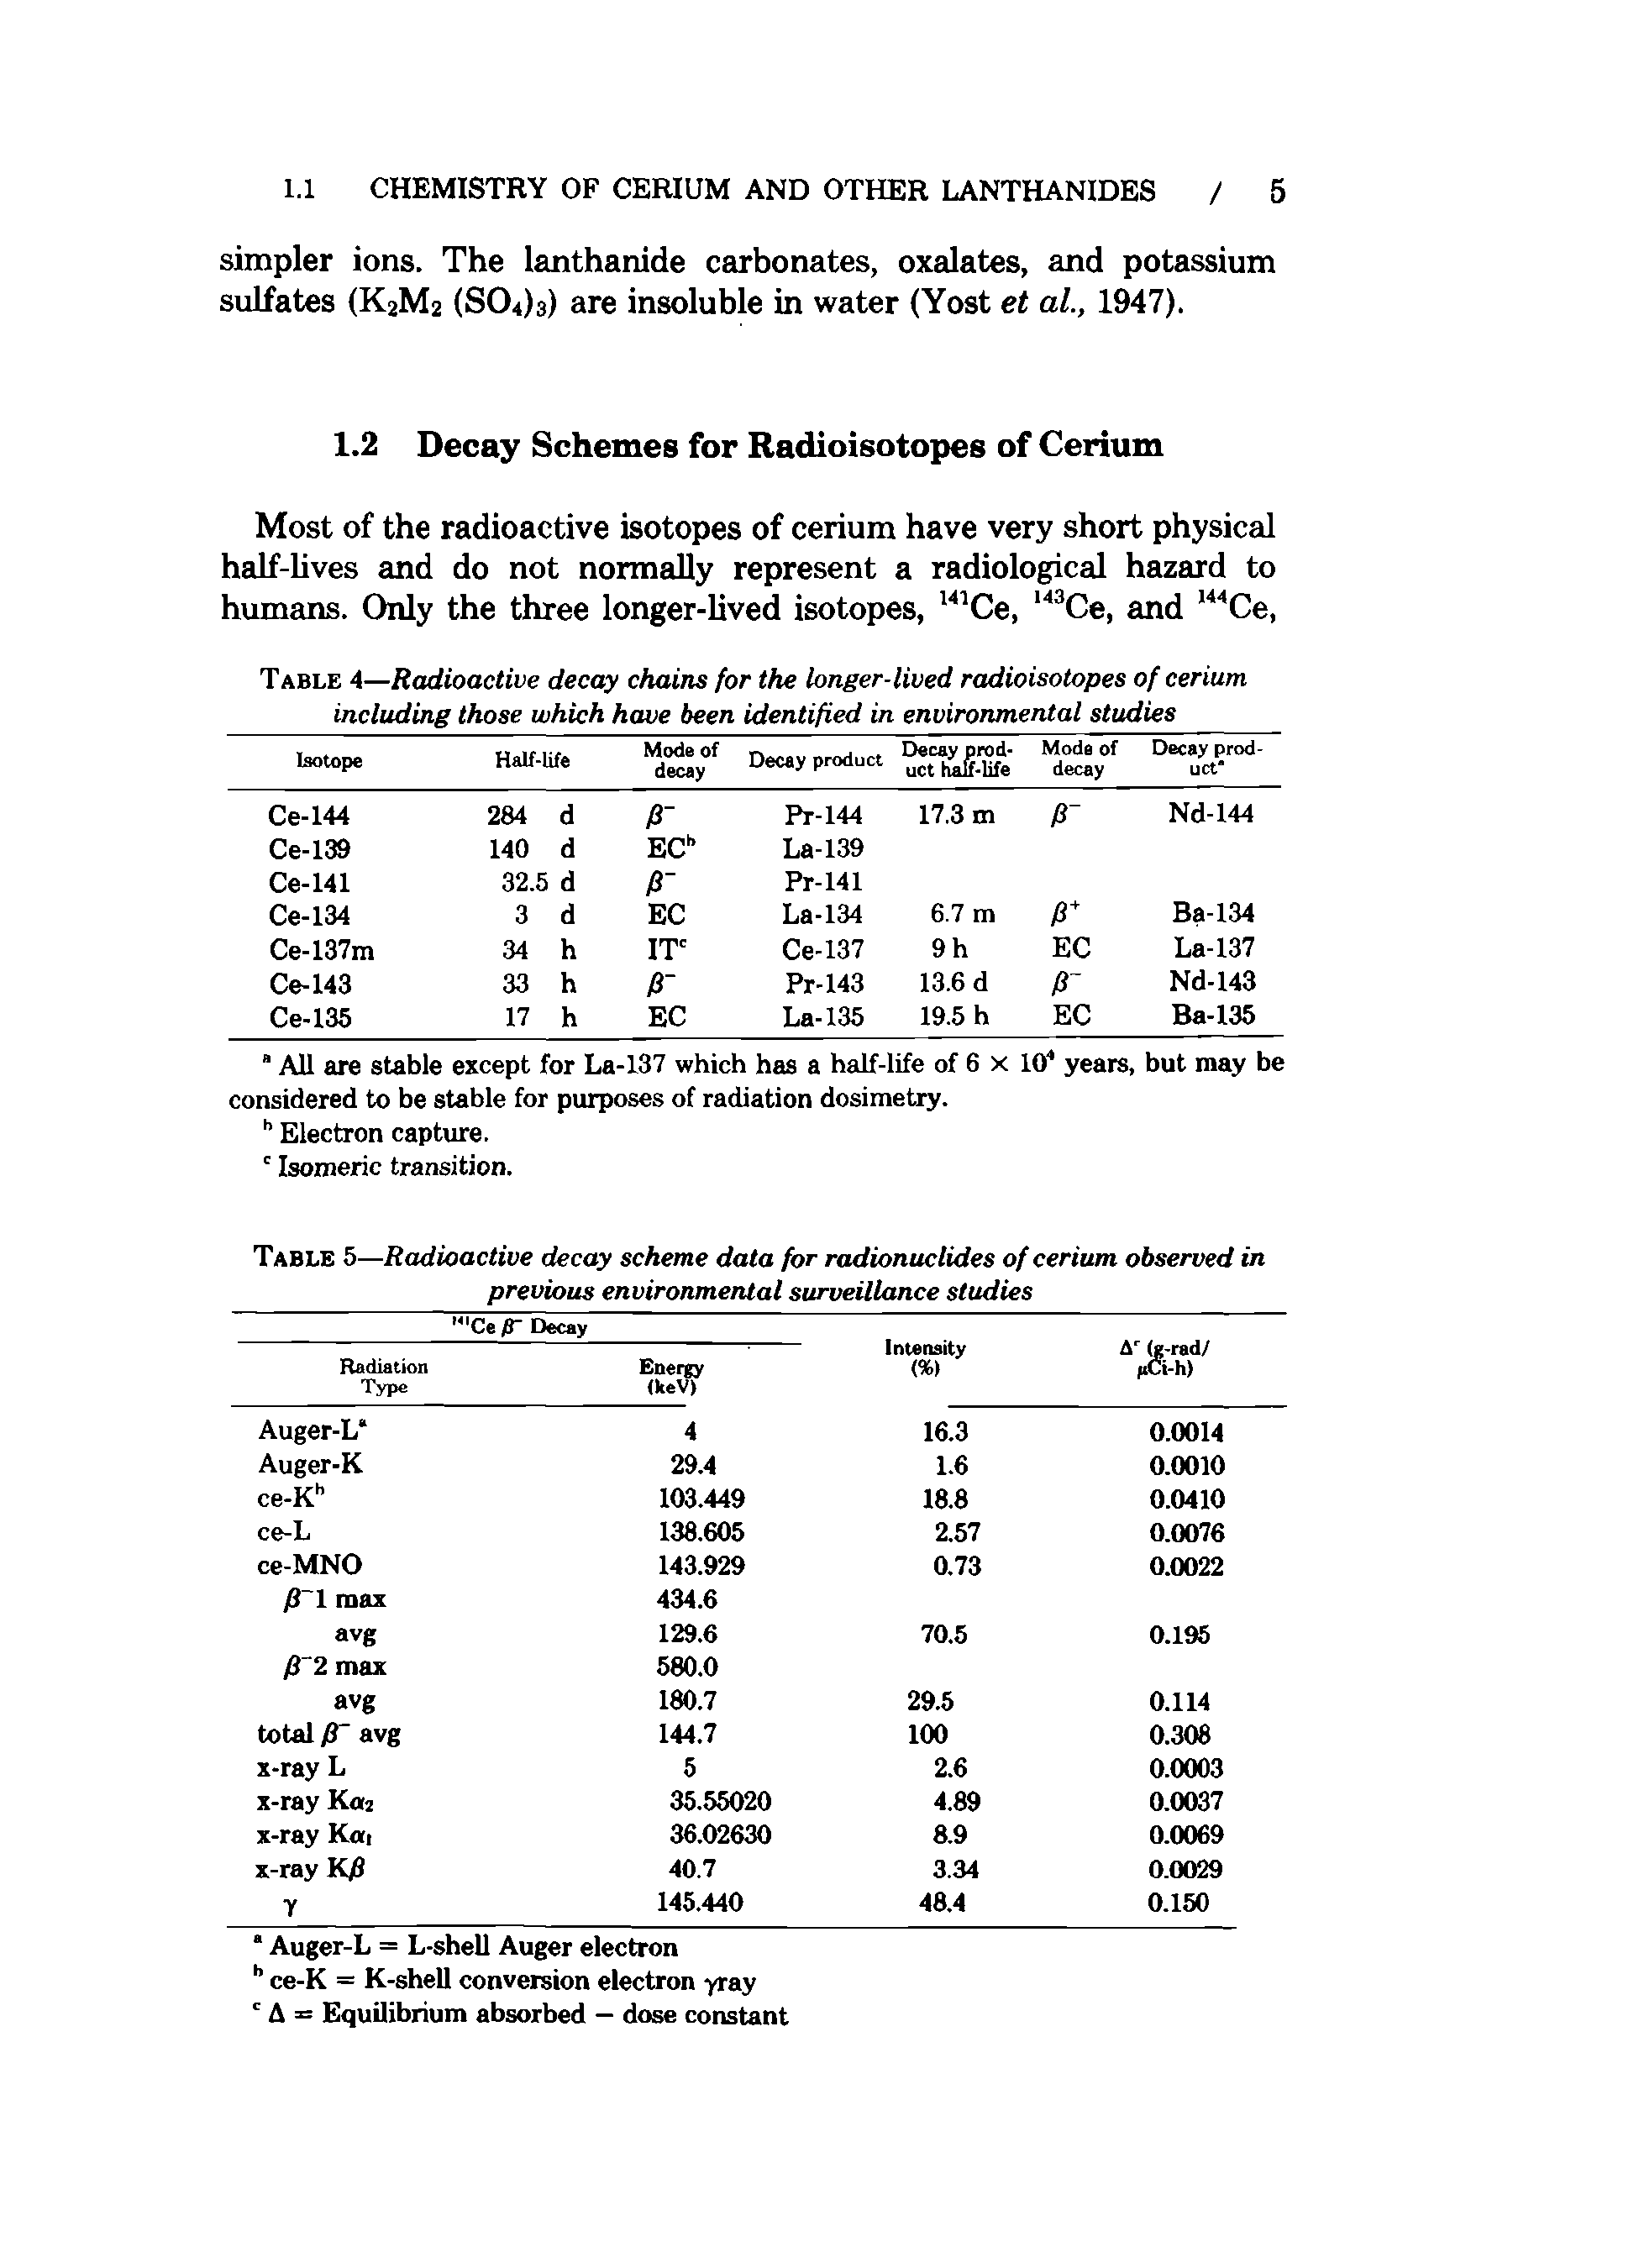 Table 5—Radioactive decay scheme data for radionuclides of cerium observed in previous environmental surveillance studies ...